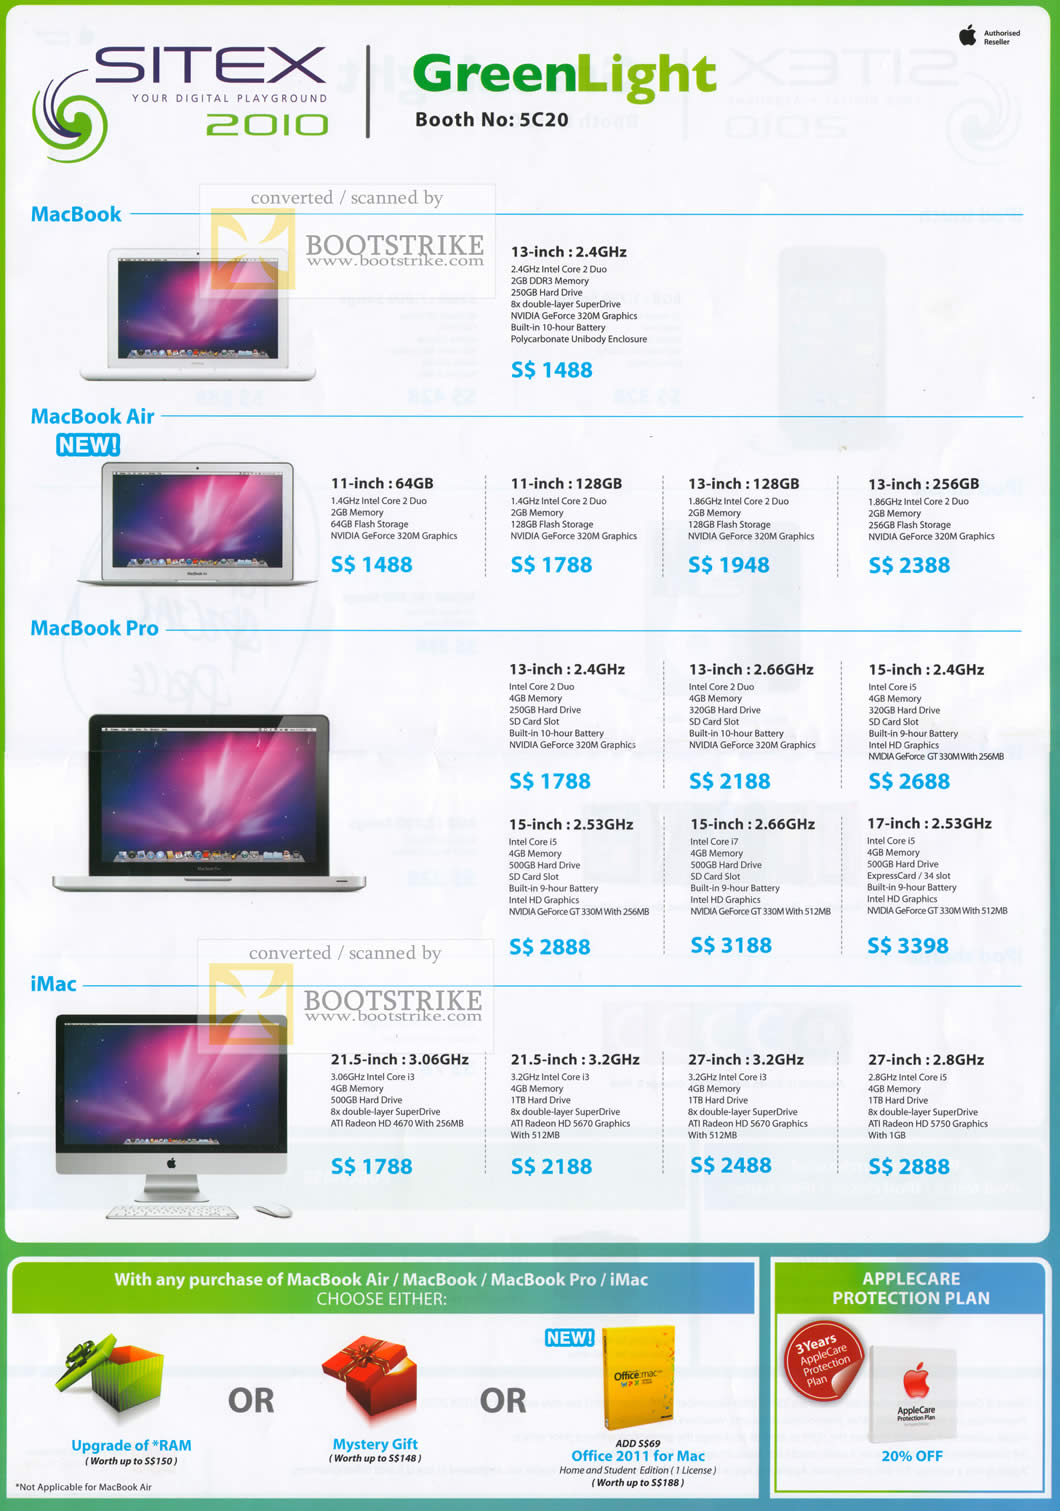 Sitex 2010 price list image brochure of Song Brothers GreenLight Apple Macbook Air Pro IMac AppleCare